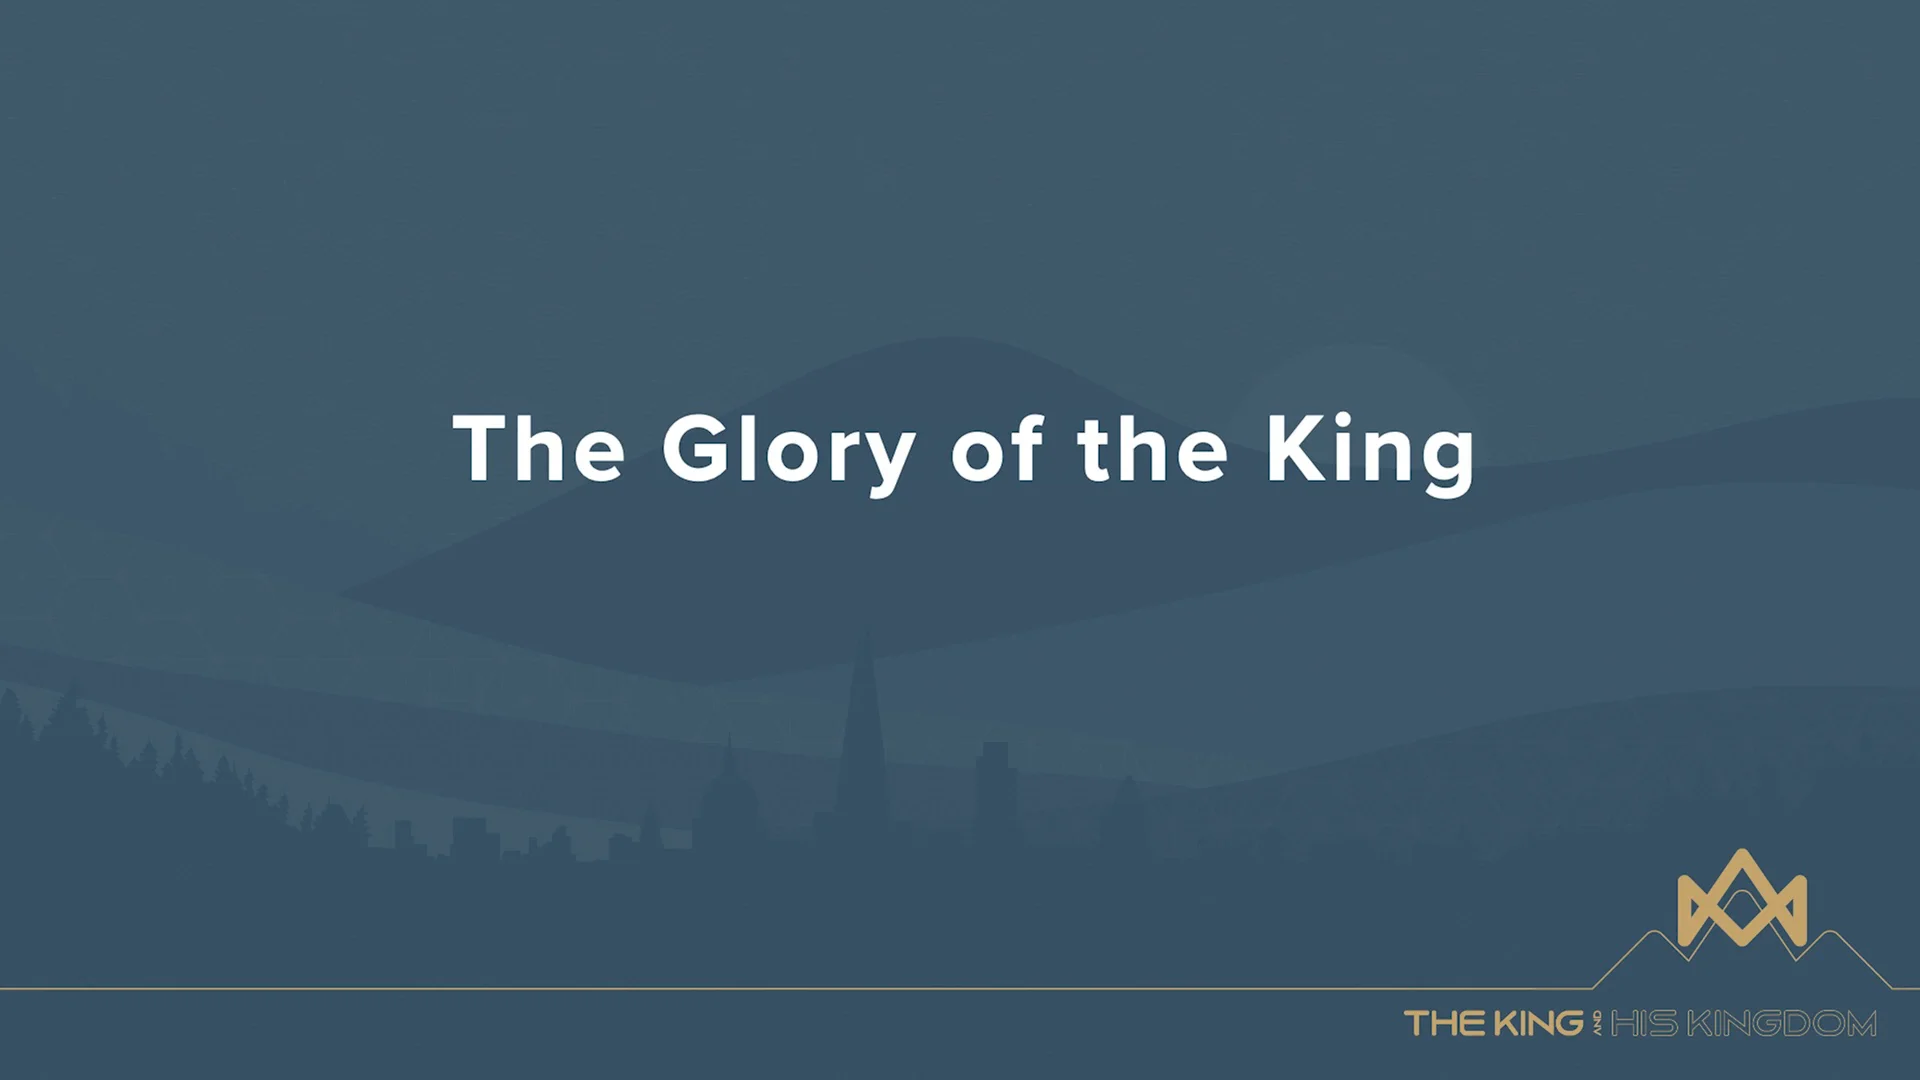 The King's Avatar: For The Glory on Vimeo